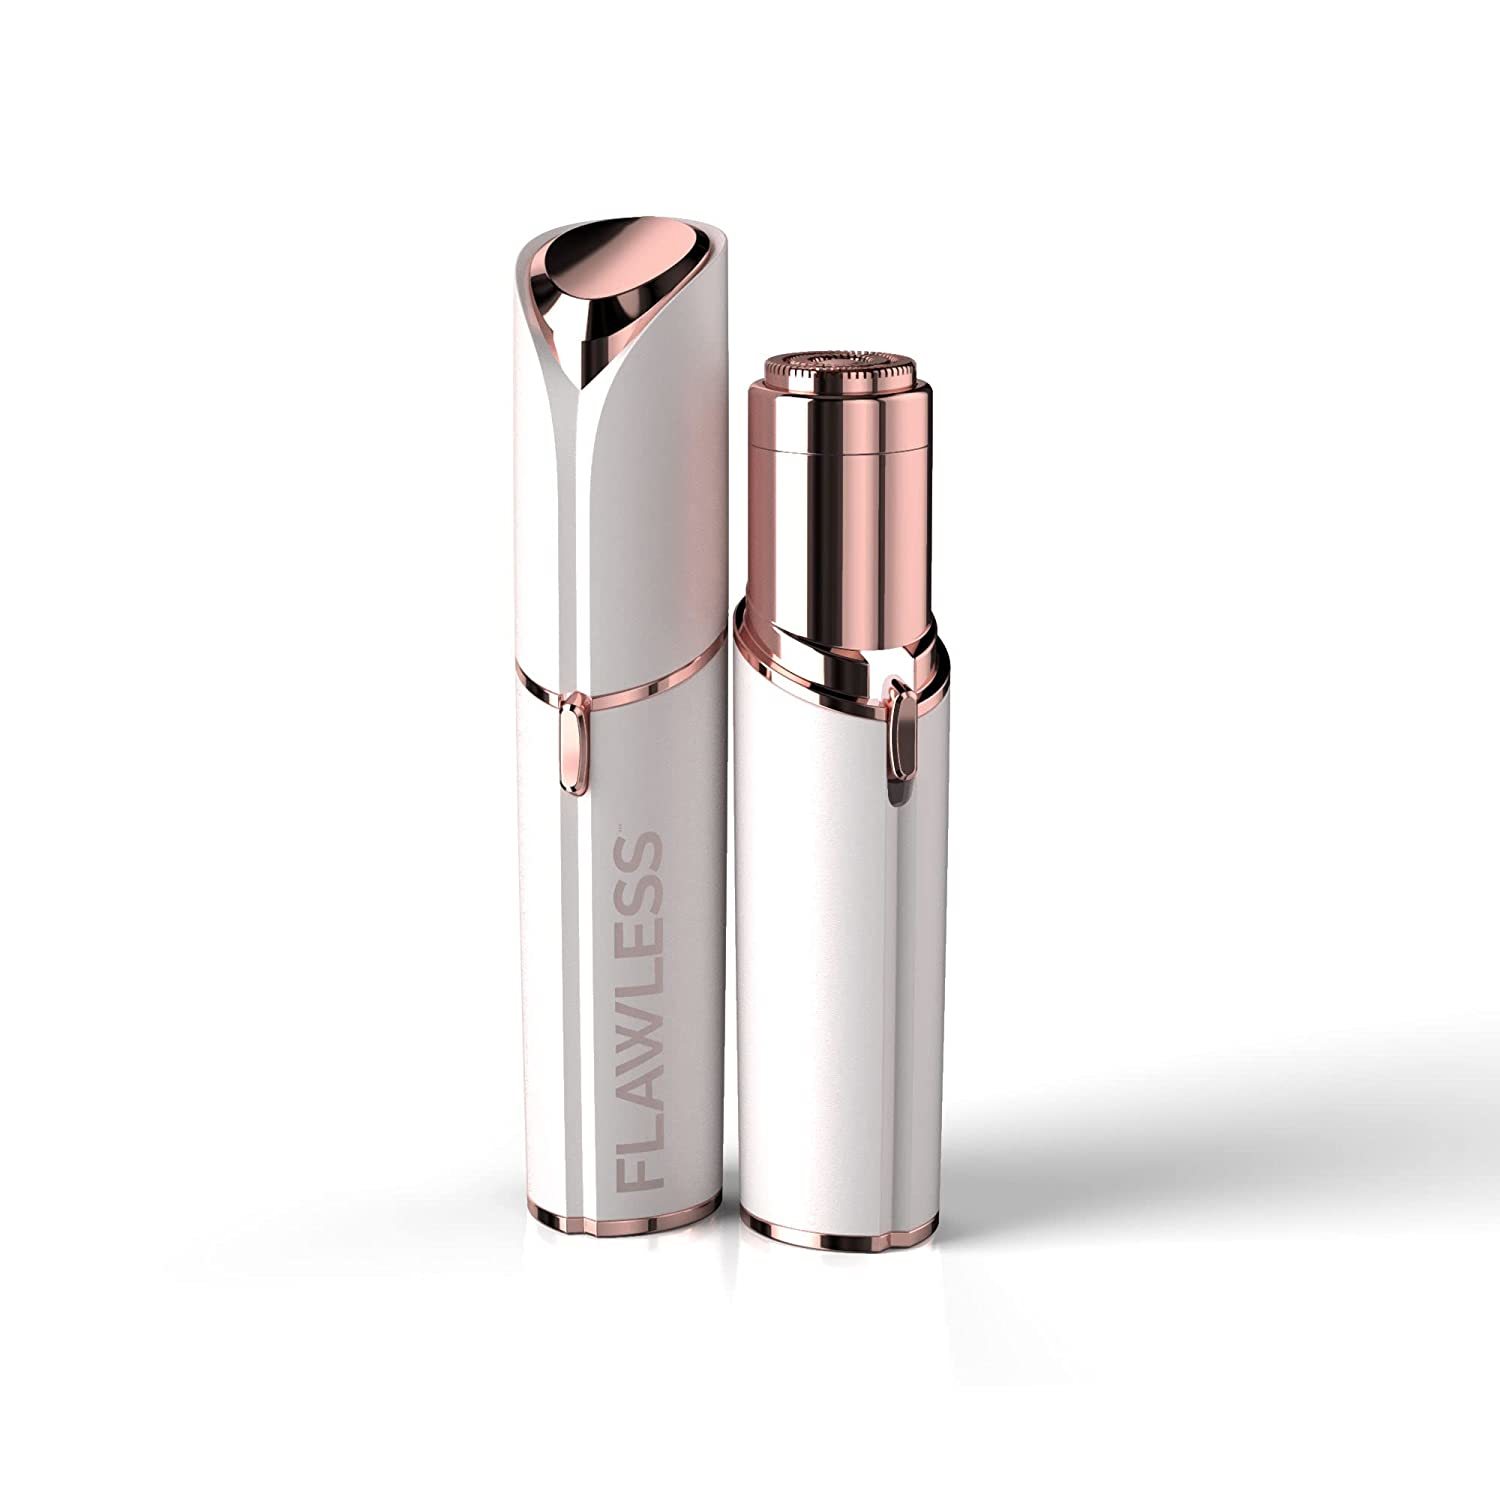 Finishing Touch Flawless Facial Hair Remover For Women, White/Rose Gold Electric - $43.92